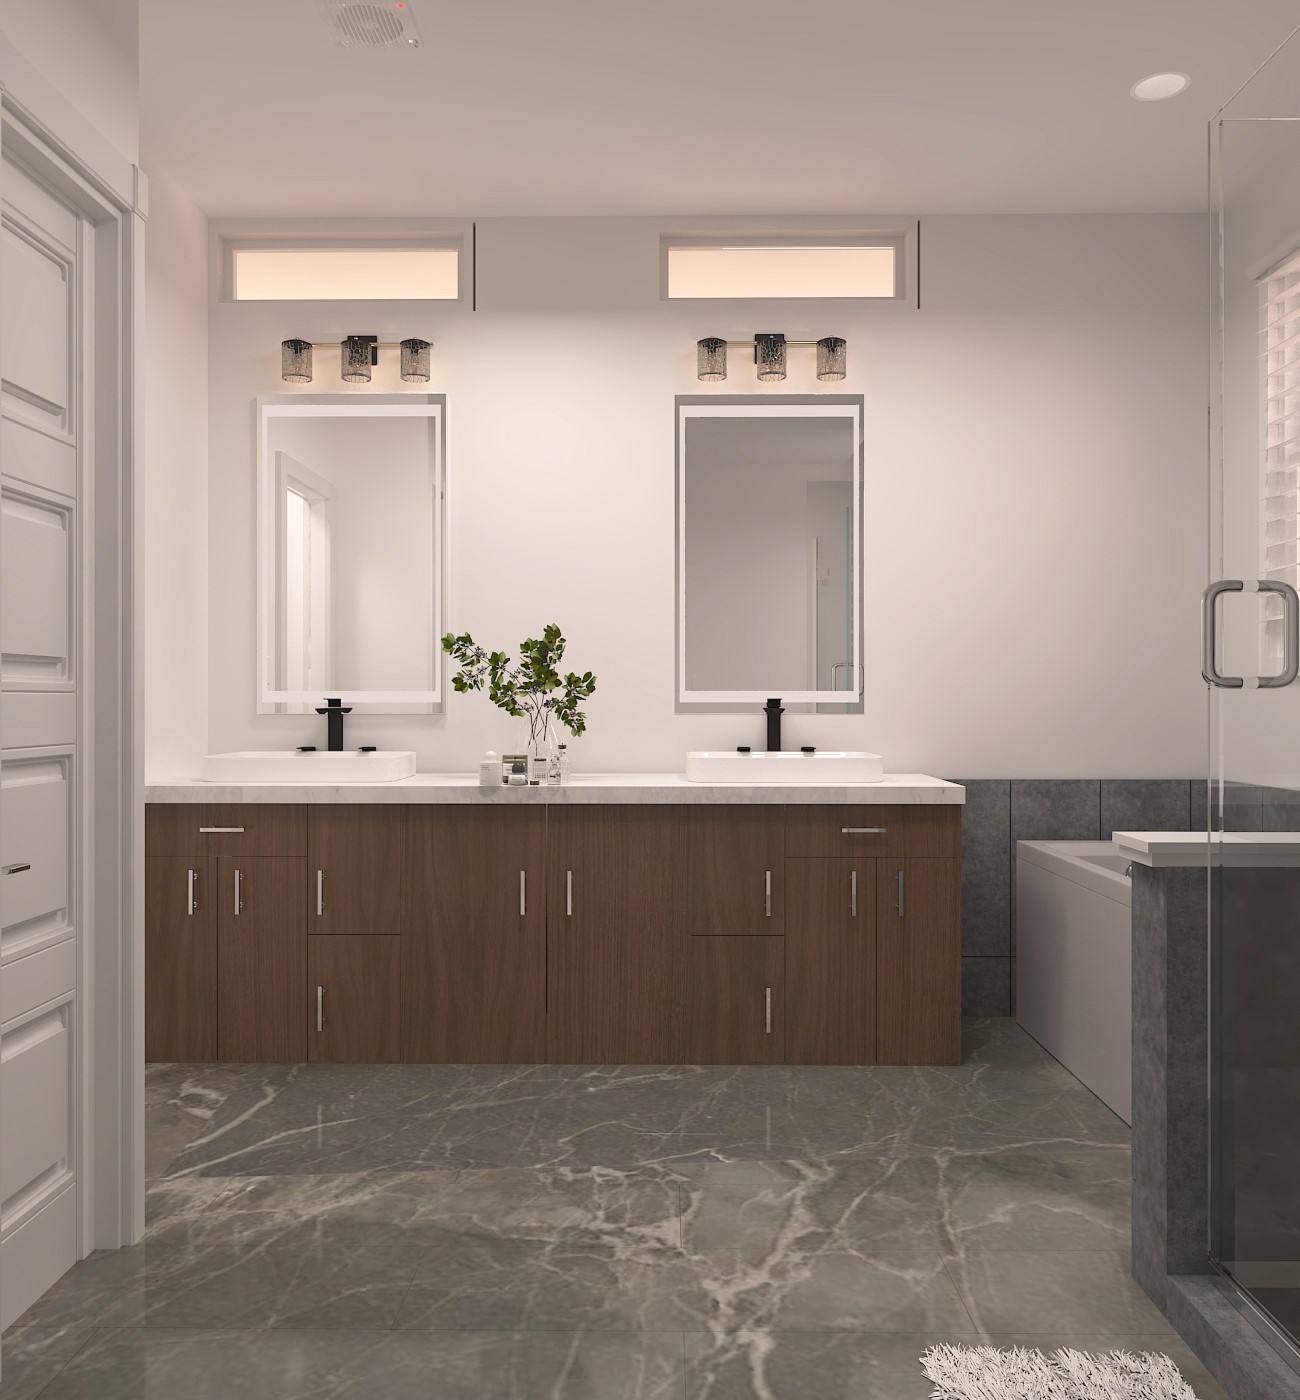 Master Bathroom    
 *this image is an artistic interpretation and subject to change*